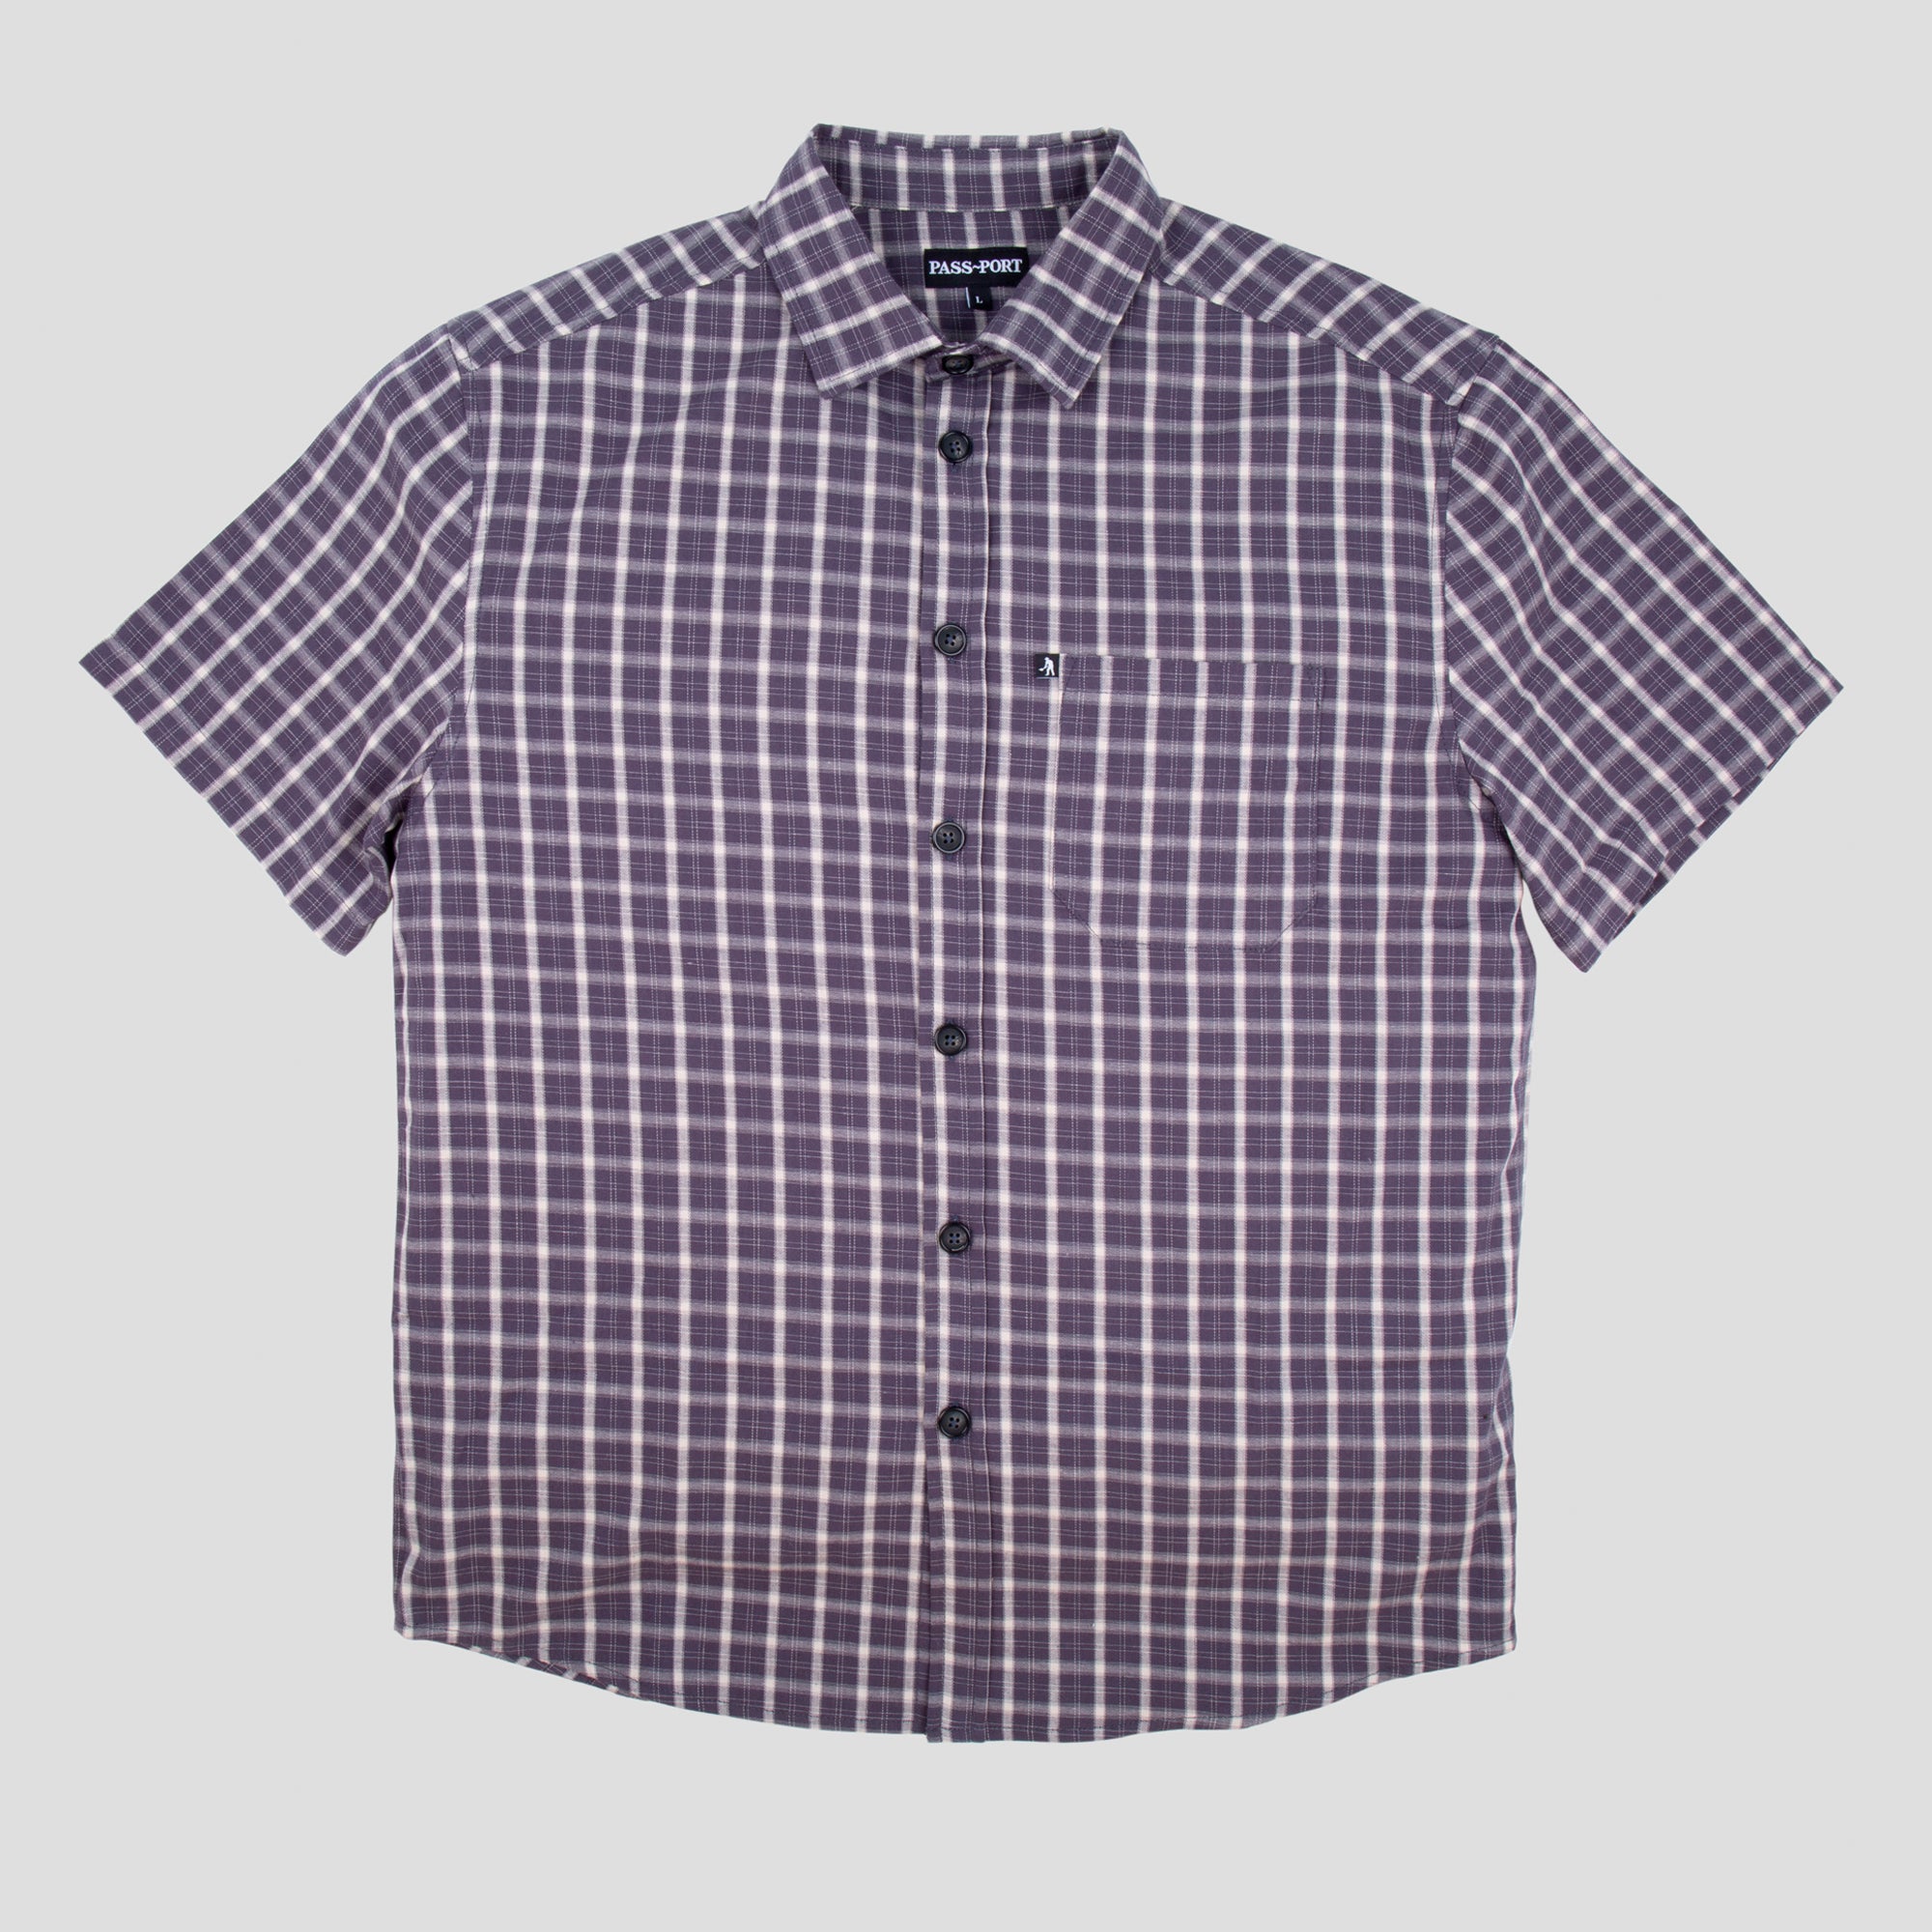 Workers Check Shirt S/S (Navy)